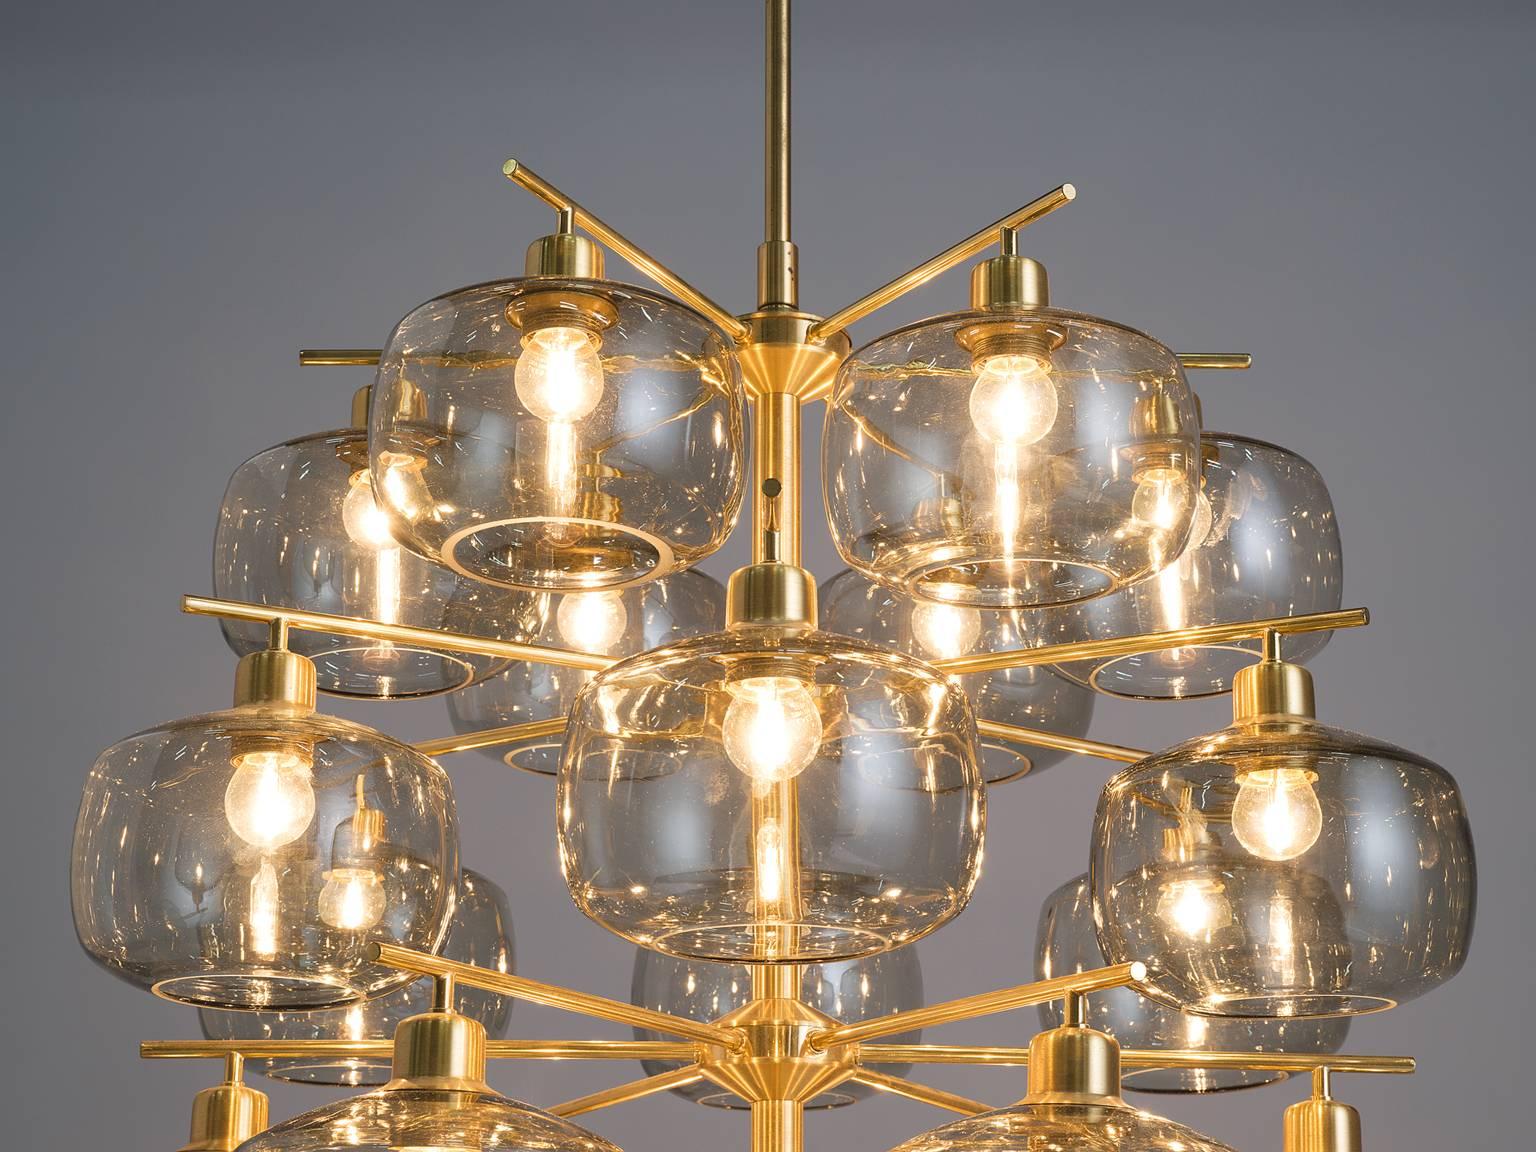 Mid-20th Century Large Swedish Chandeliers by Holger Johansson, 1952